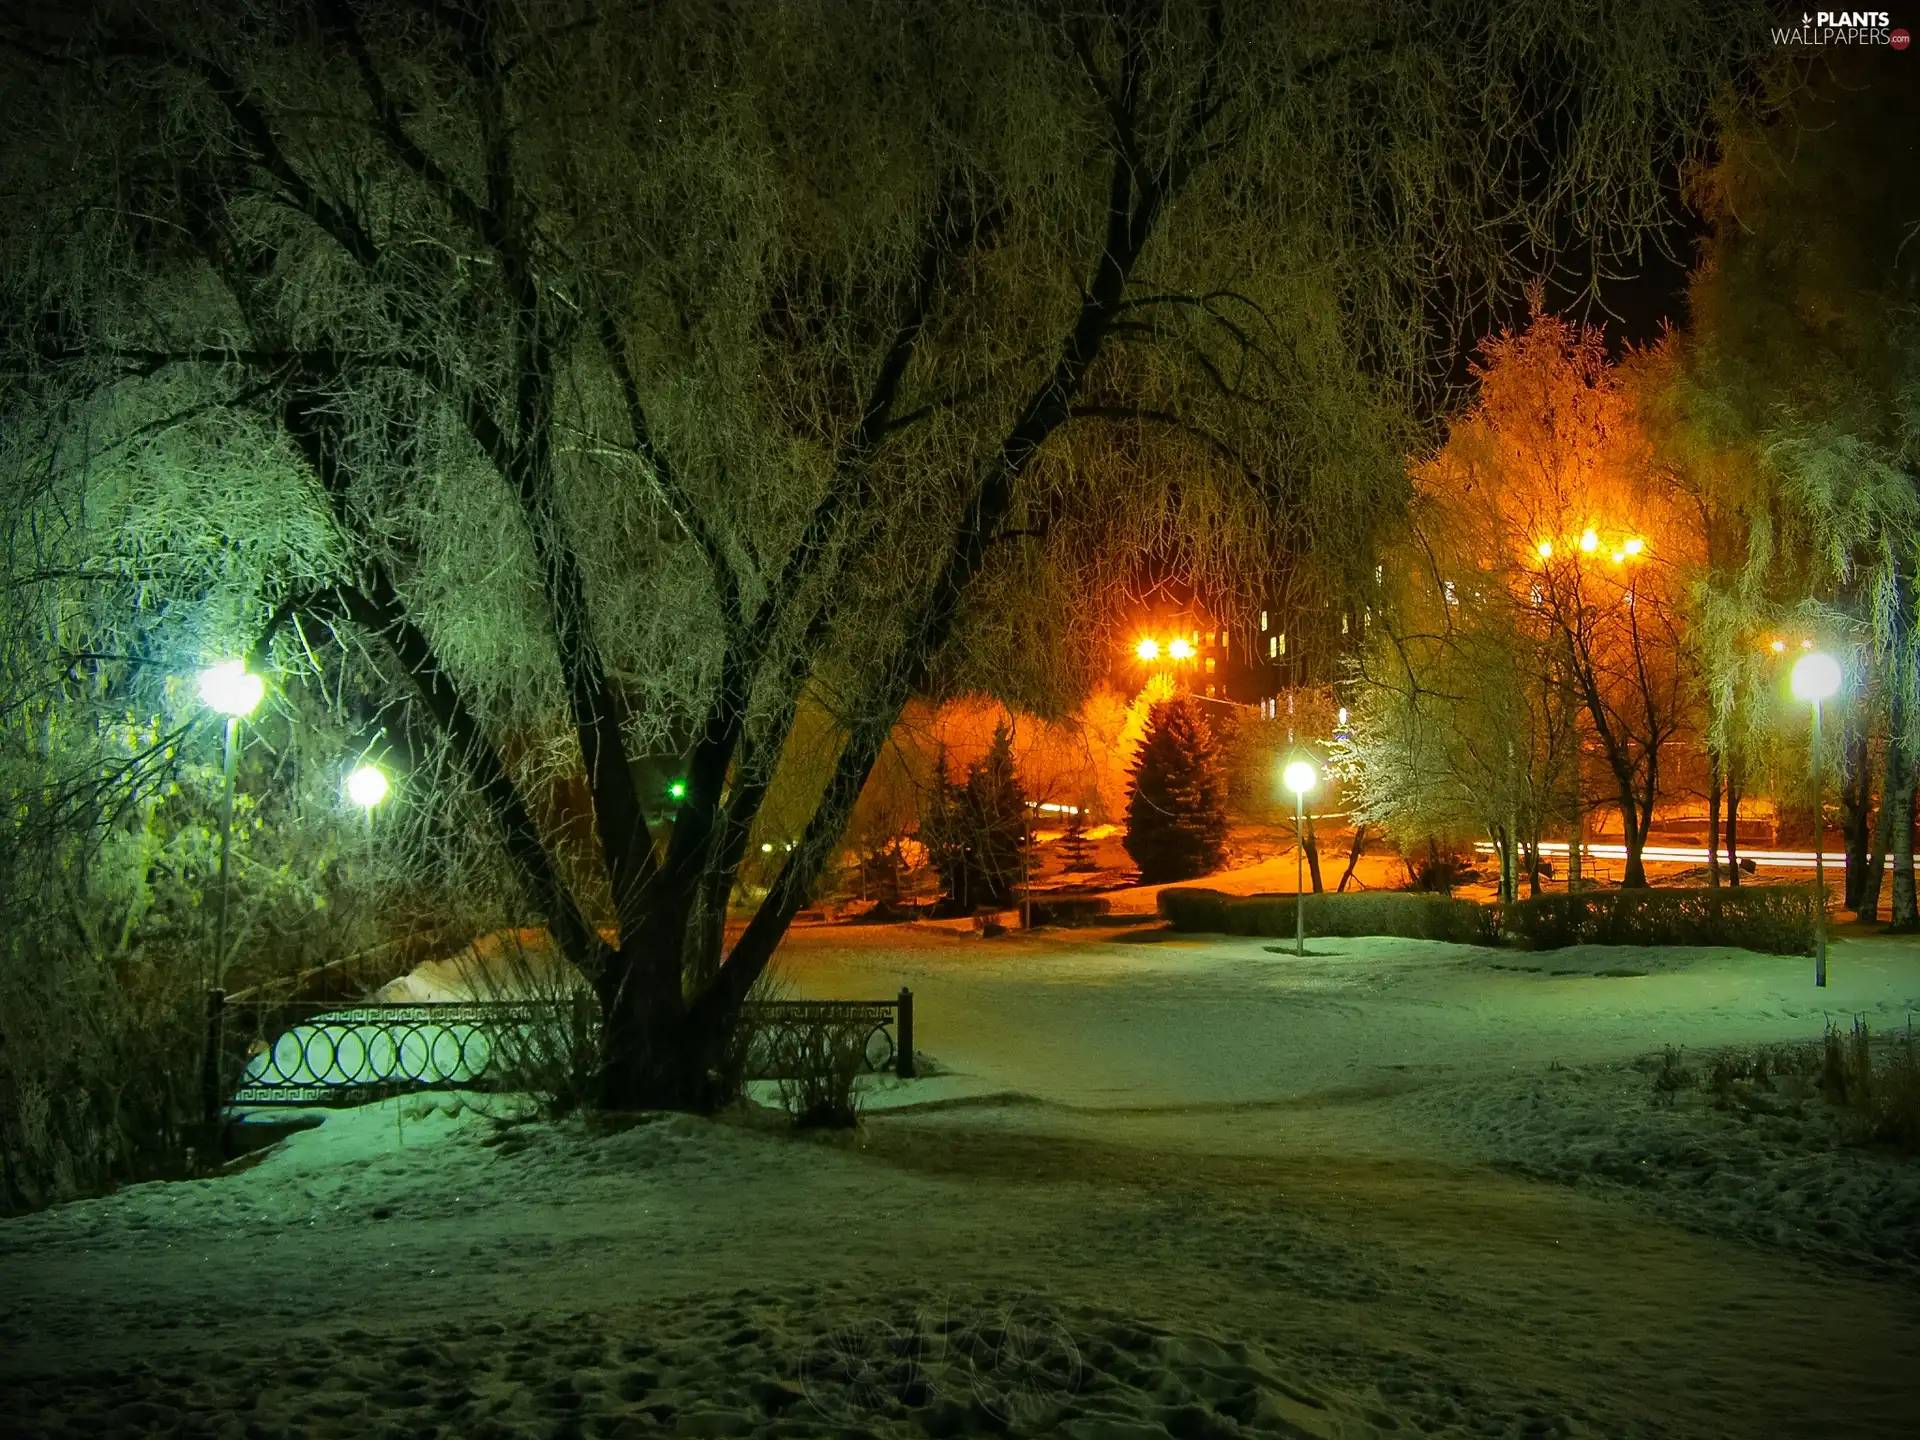 viewes, Park, Night, winter, Lamps, trees